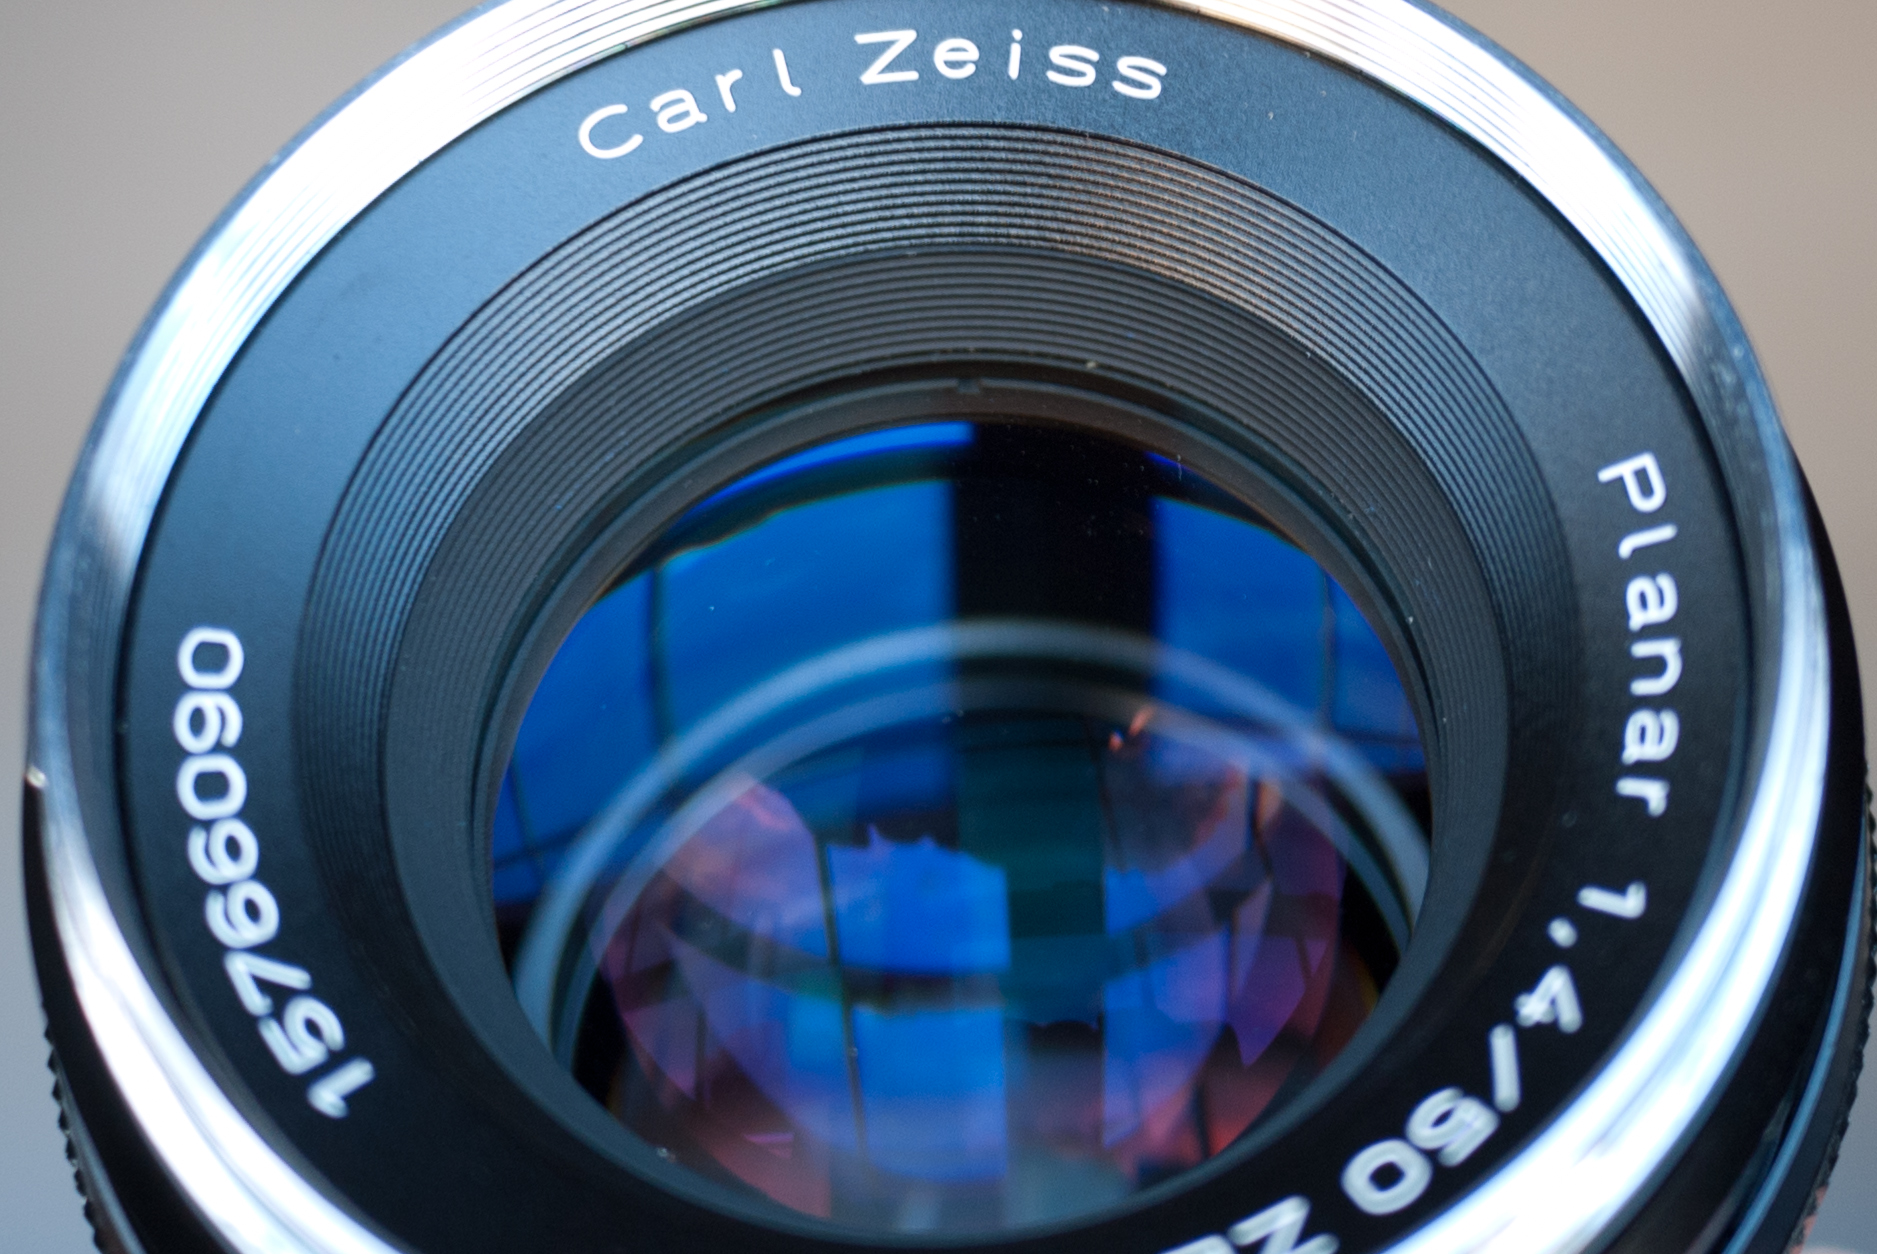 Review: Zeiss Planar T* 50mm f/1.4 ZE - The Phoblographer